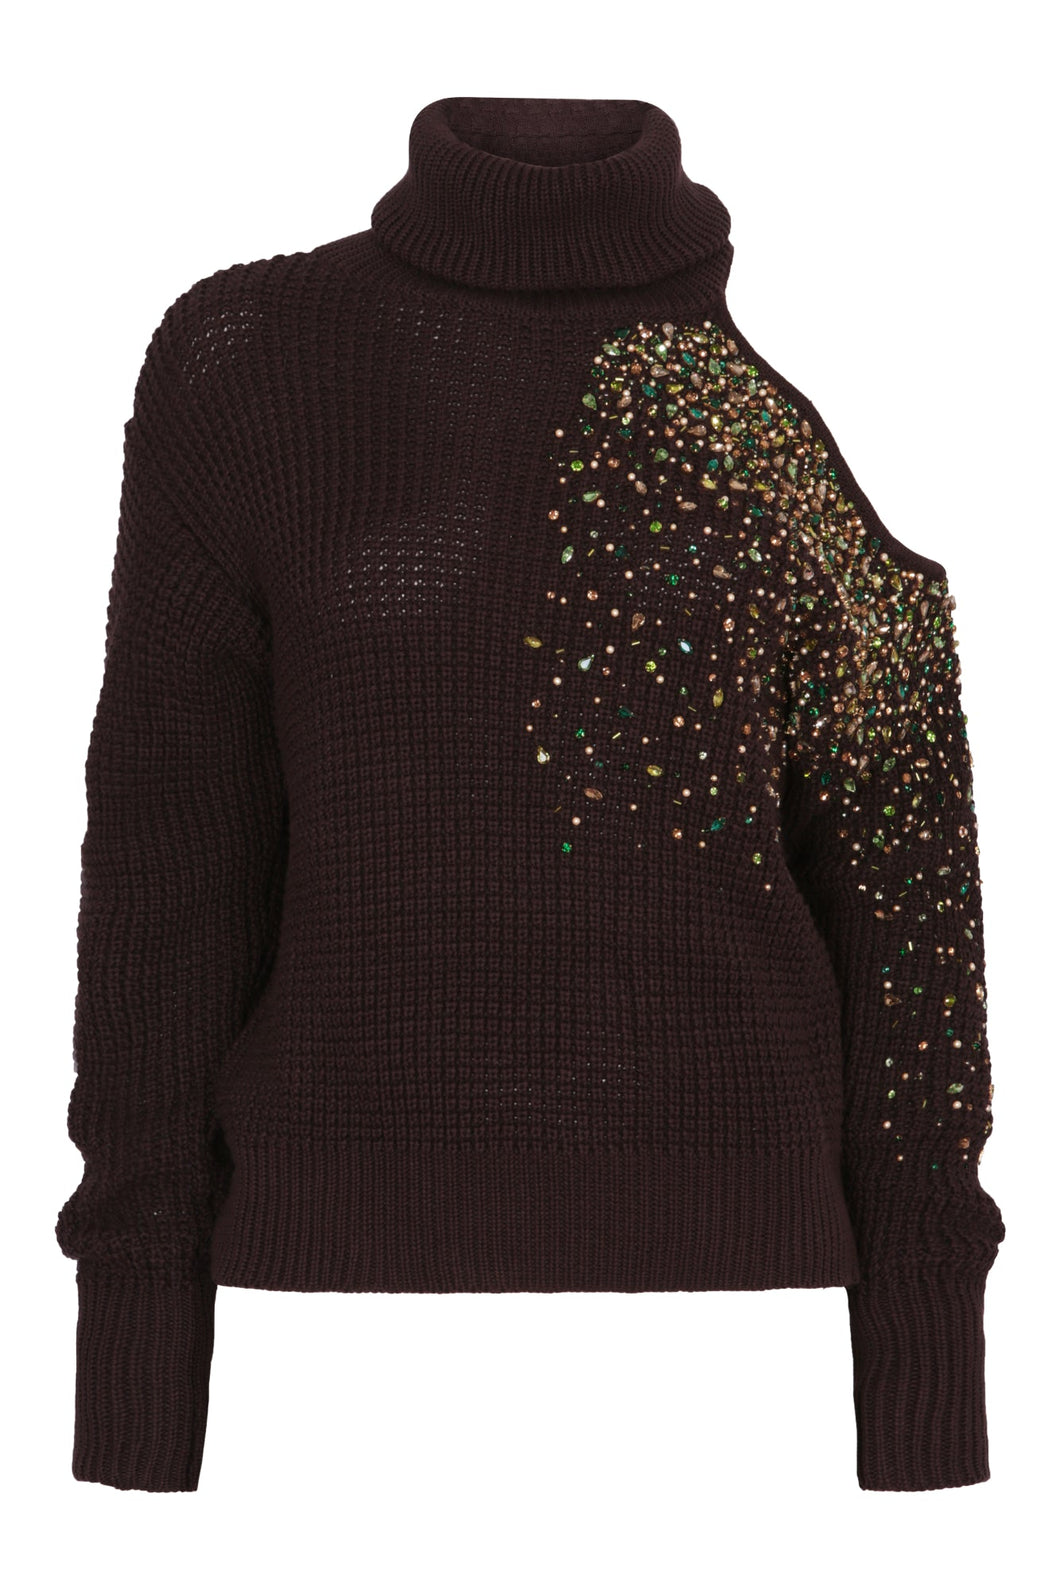 Embellished Cut Out Chunky Polo Neck Sweater in Chestnut